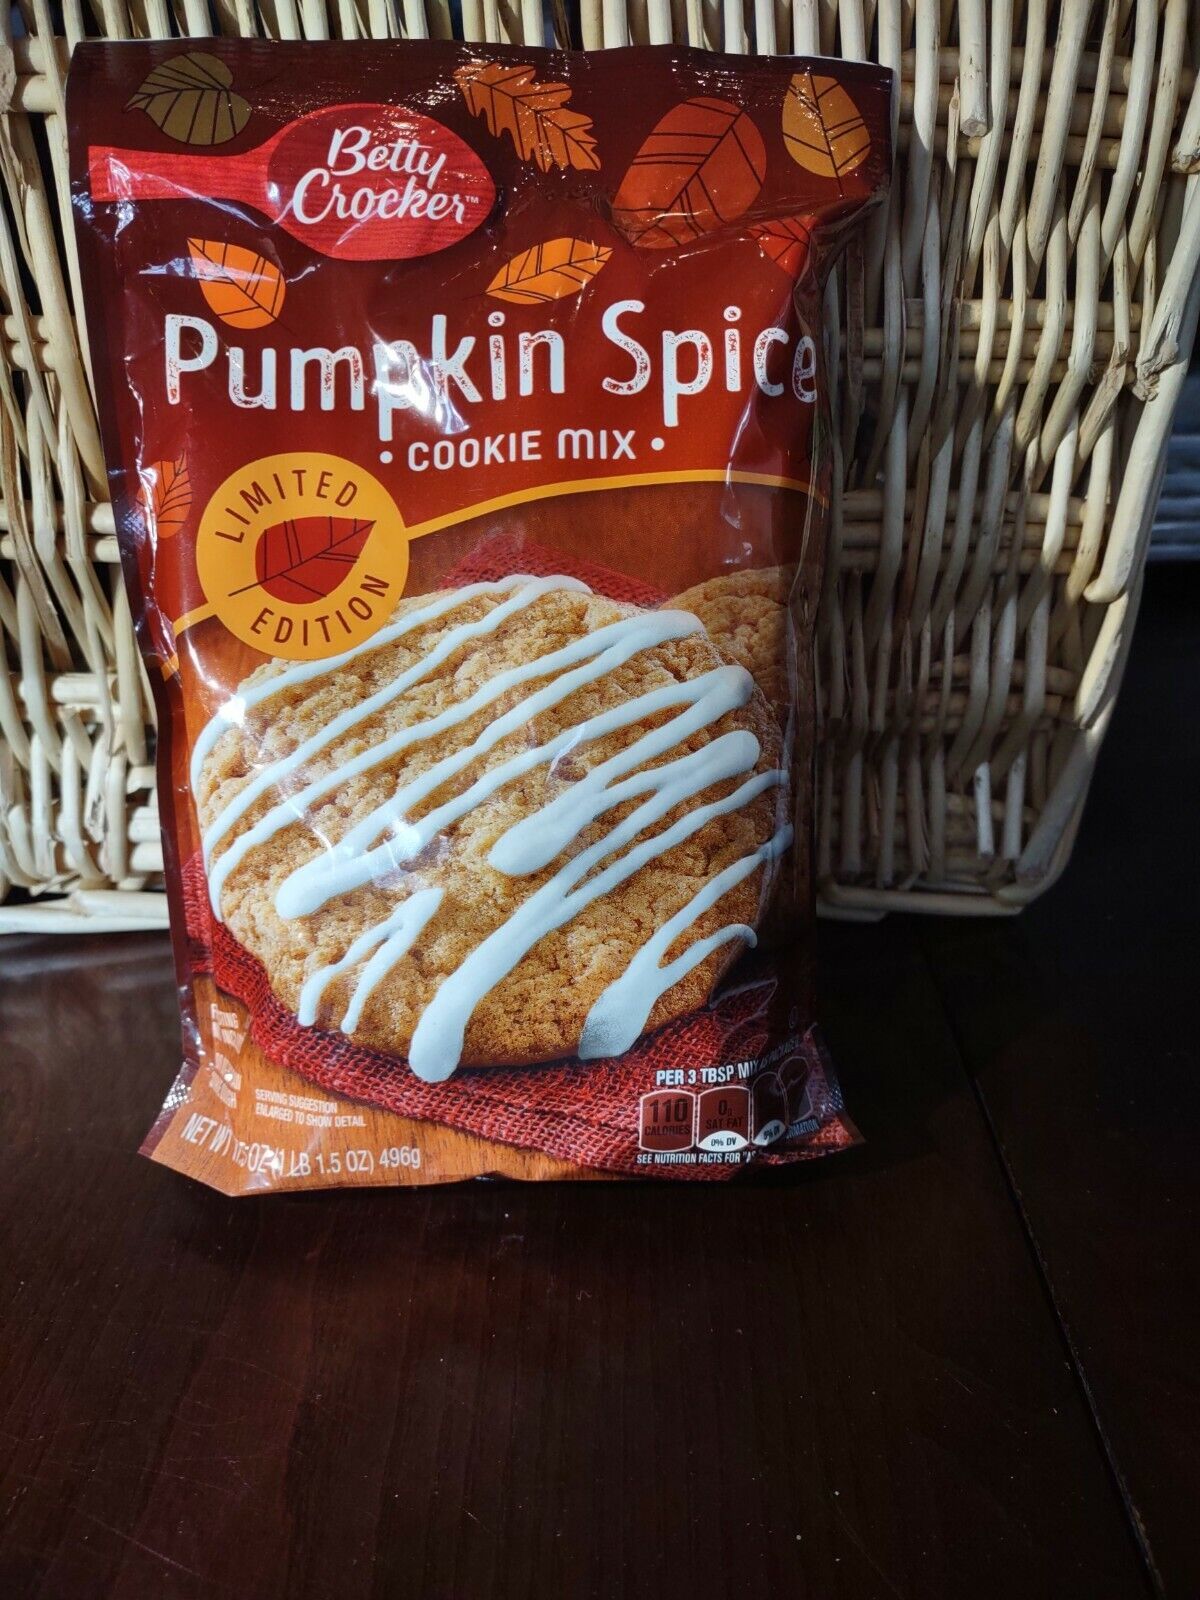 Primary image for Pumpkin Spice Cookie Mix Limited Edition